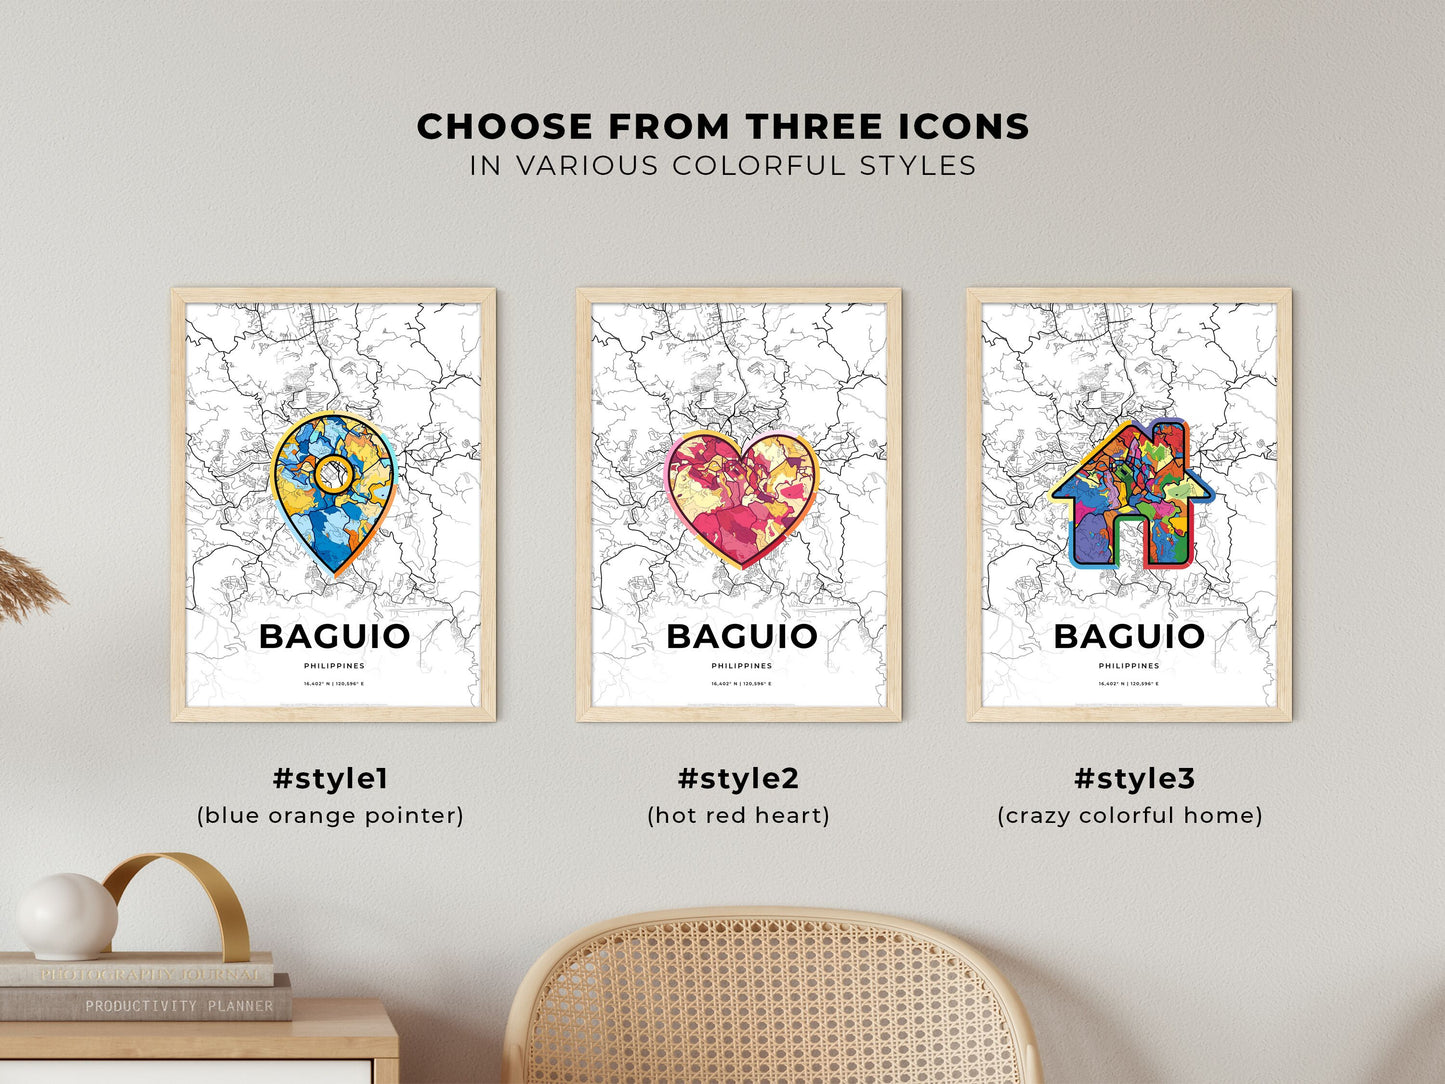 BAGUIO PHILIPPINES minimal art map with a colorful icon. Where it all began, Couple map gift.